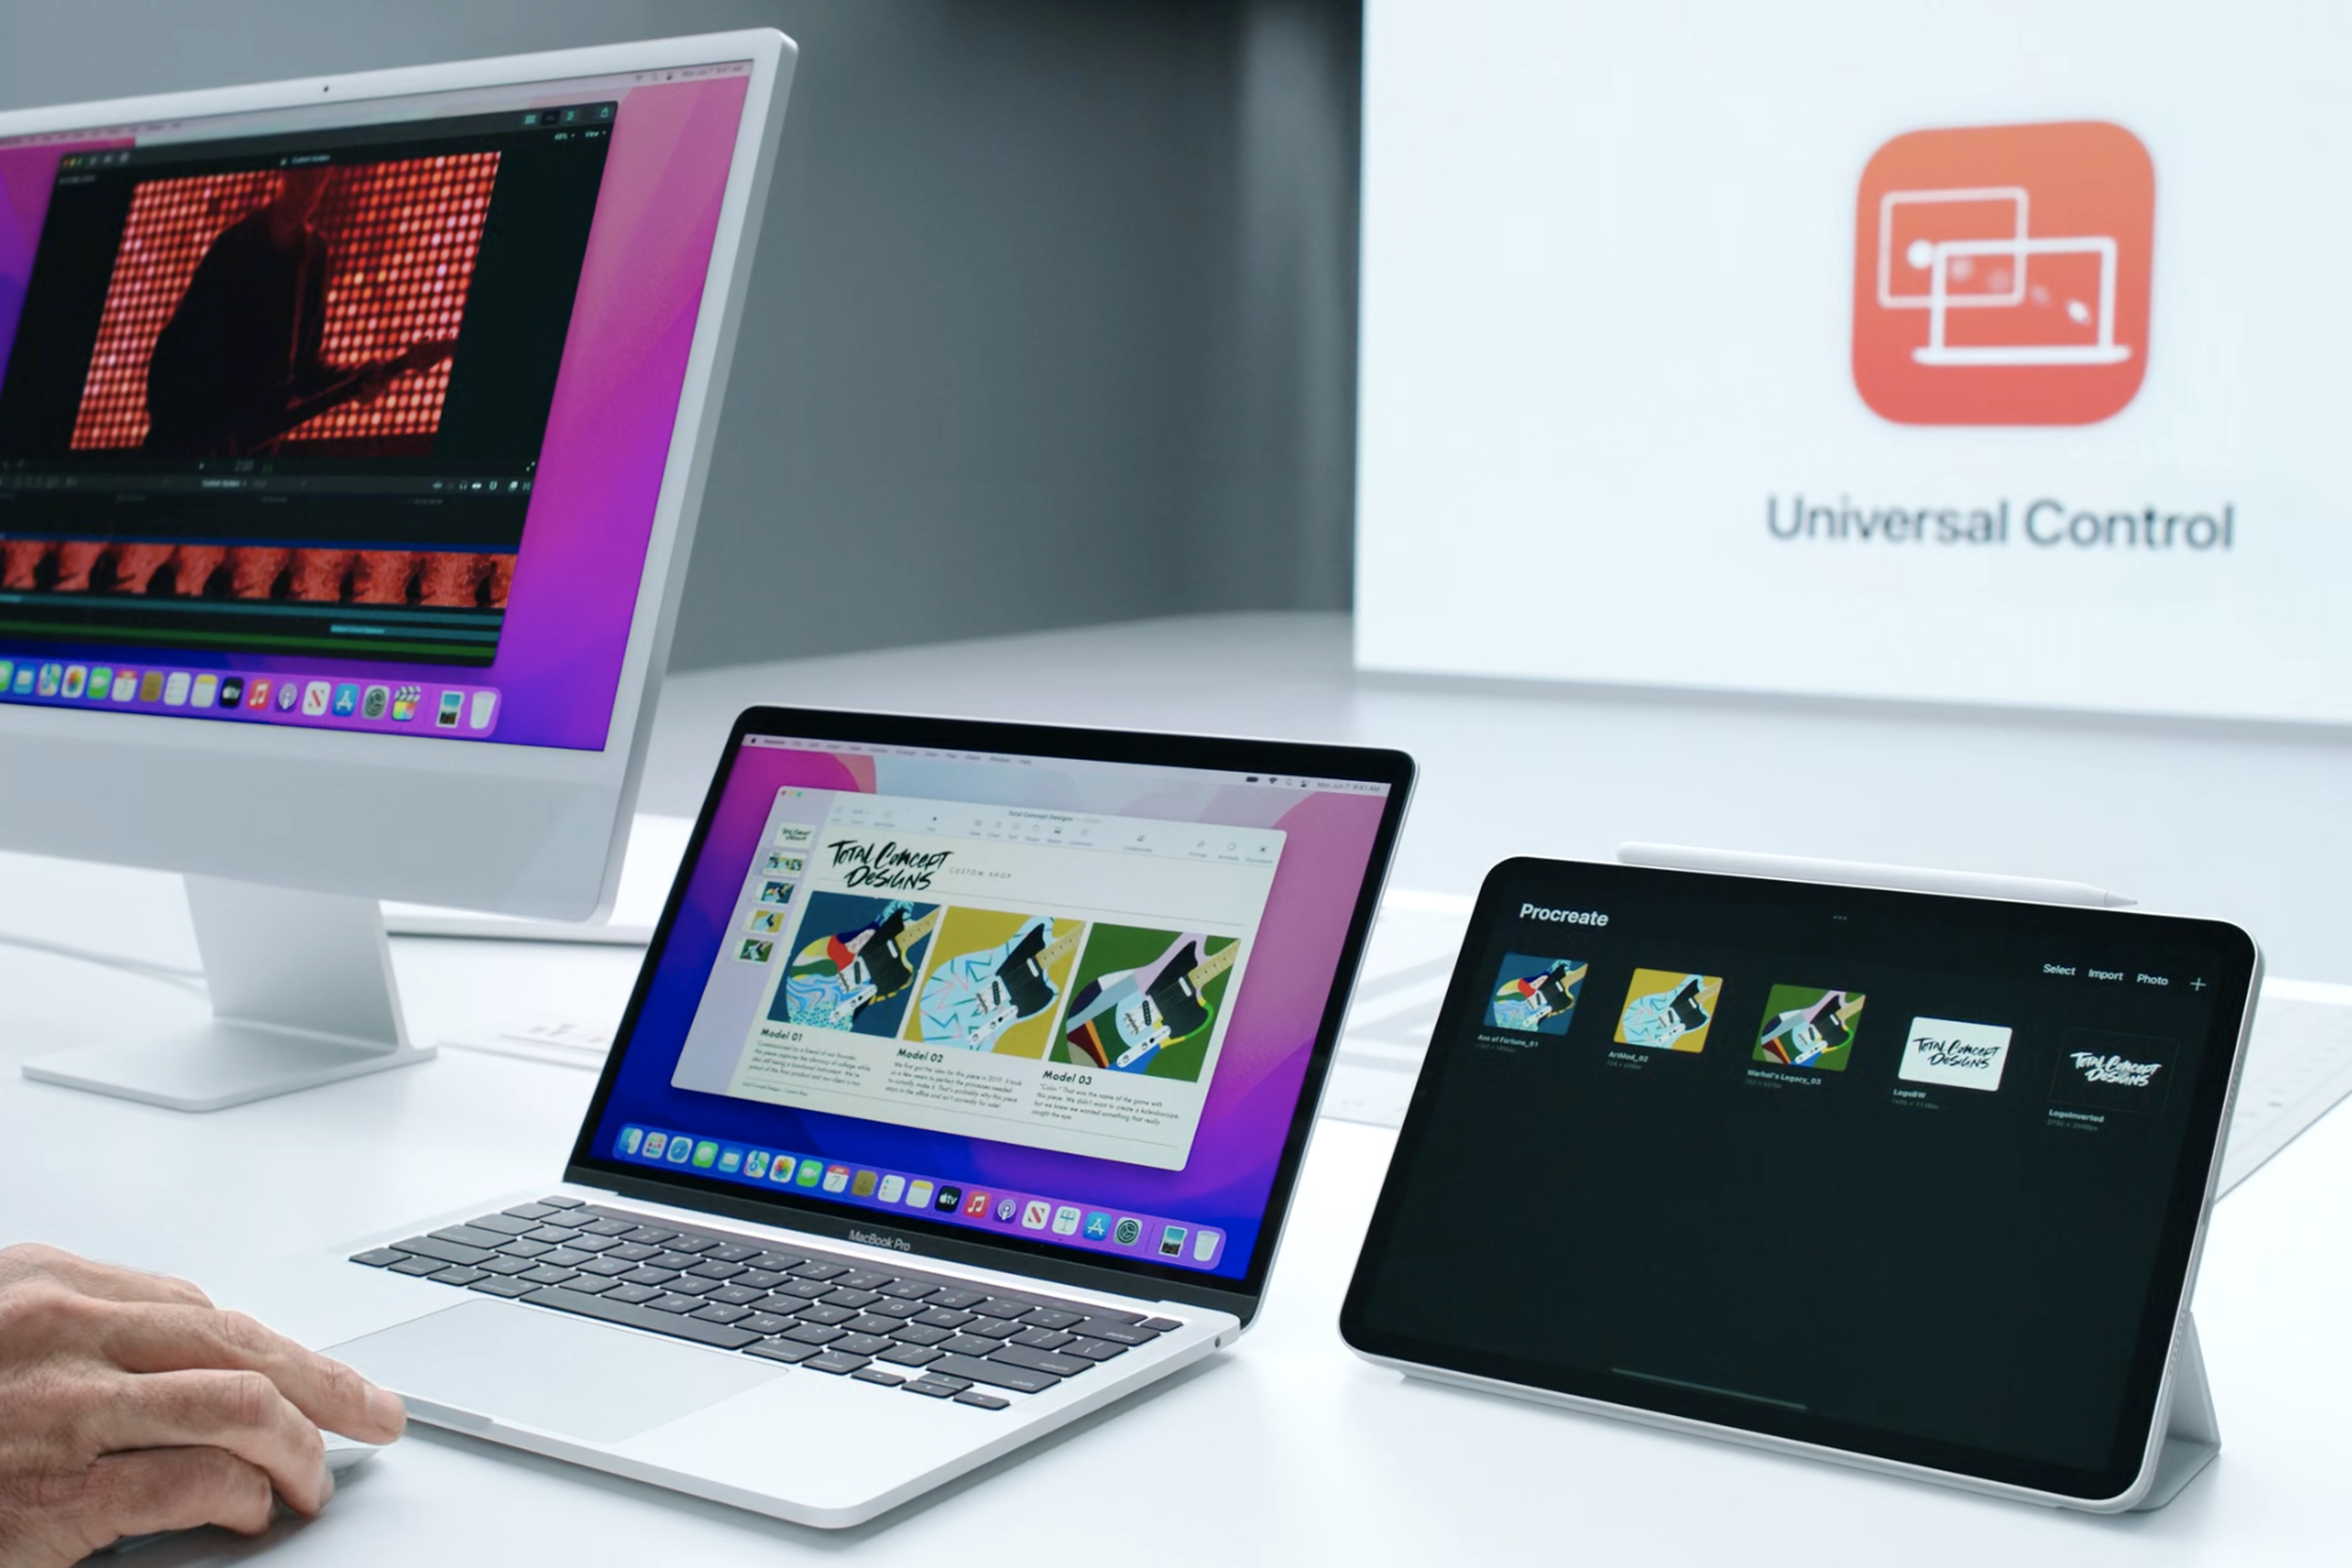 Universal Control links multiple Macs and iPads together under a single mouse and keyboard.